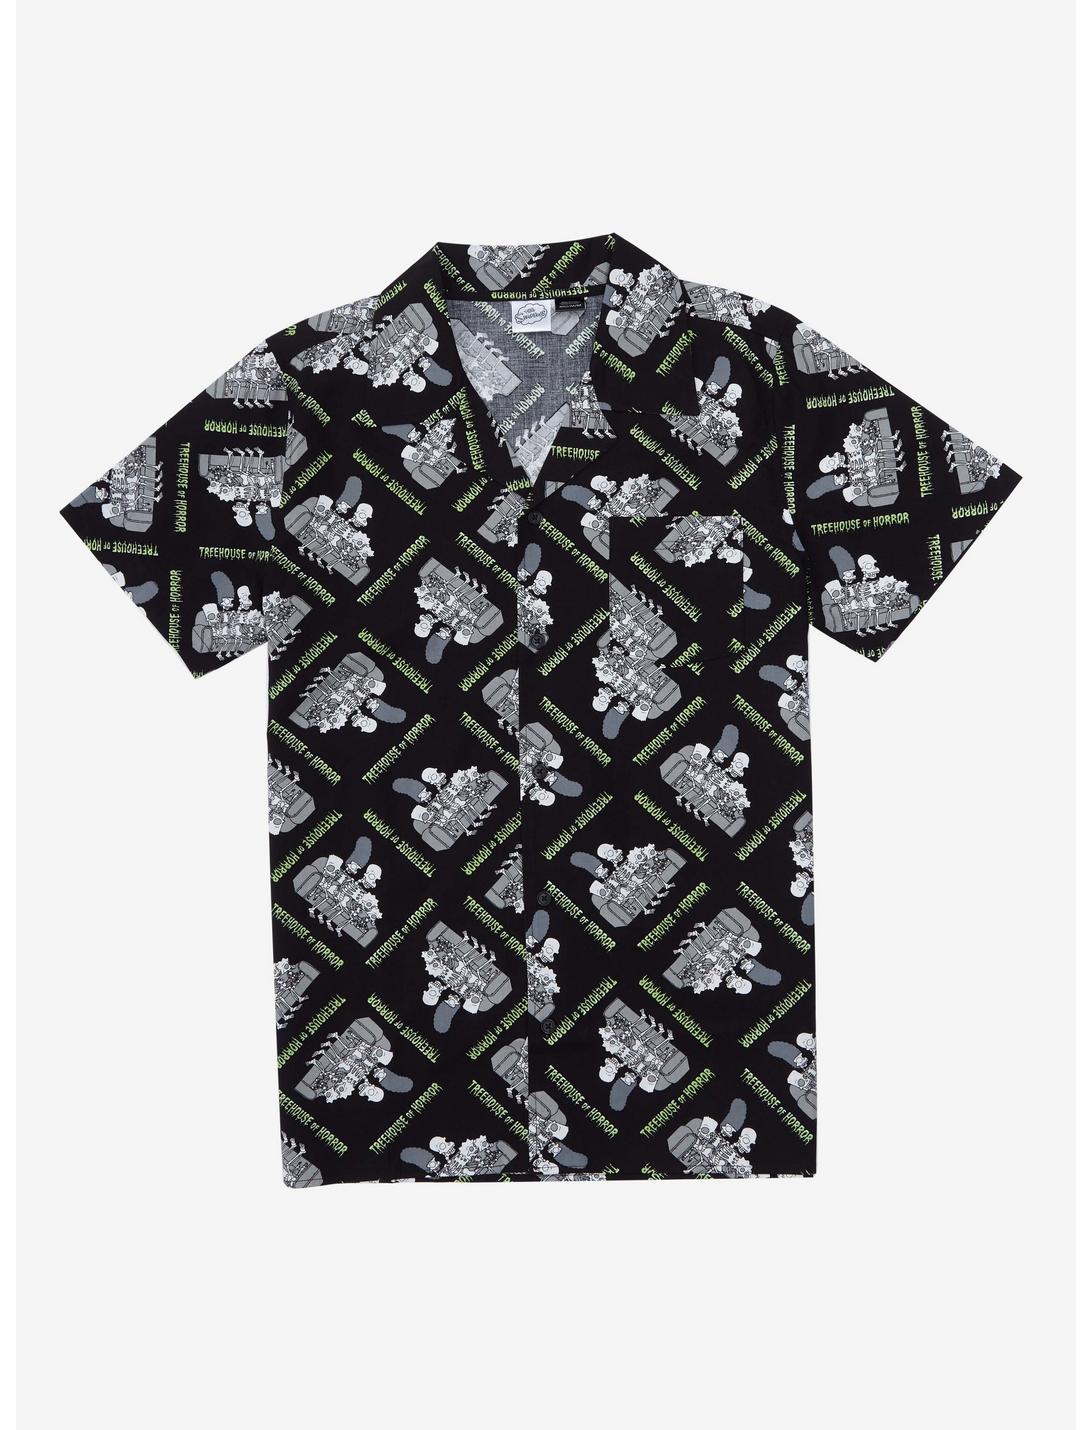 The Simpsons Treehouse of Horror Woven Button-Up - BoxLunch Exclusive, BLACK, hi-res